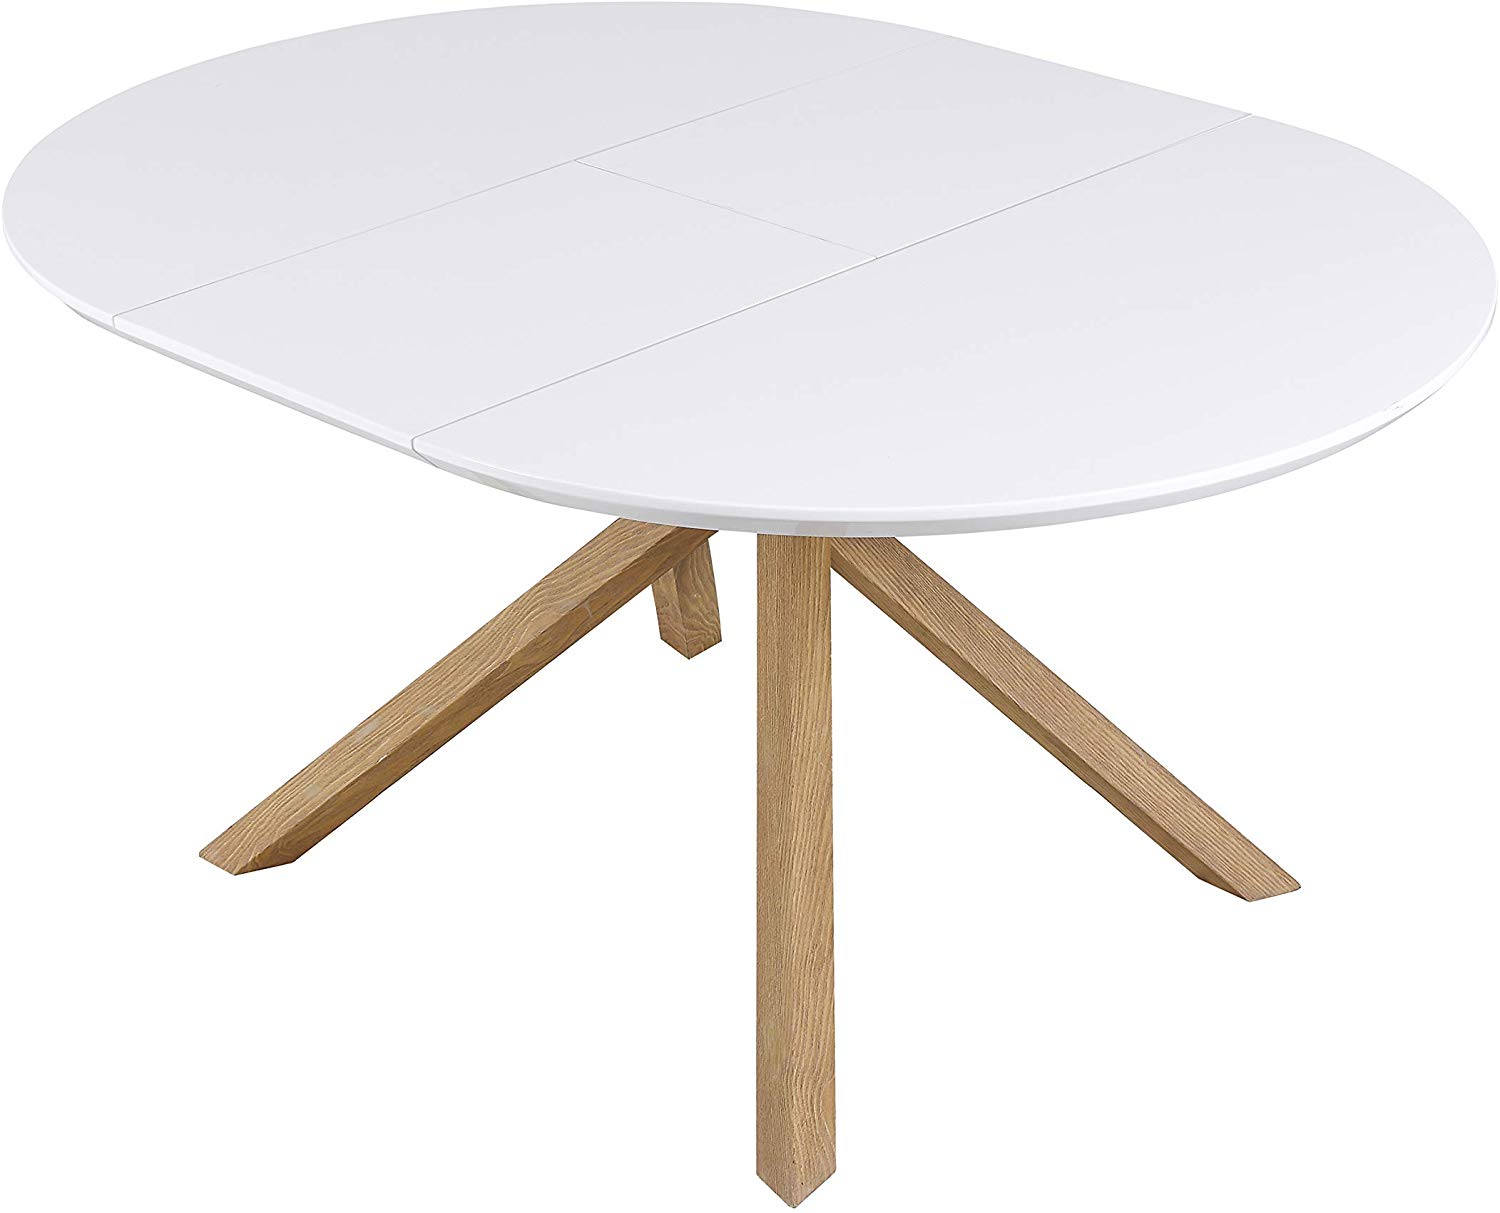 Grenchen Round To Oval 4 To 6 Seater White High Gloss Extendable Dining Table Shop Designer Home Furnishings